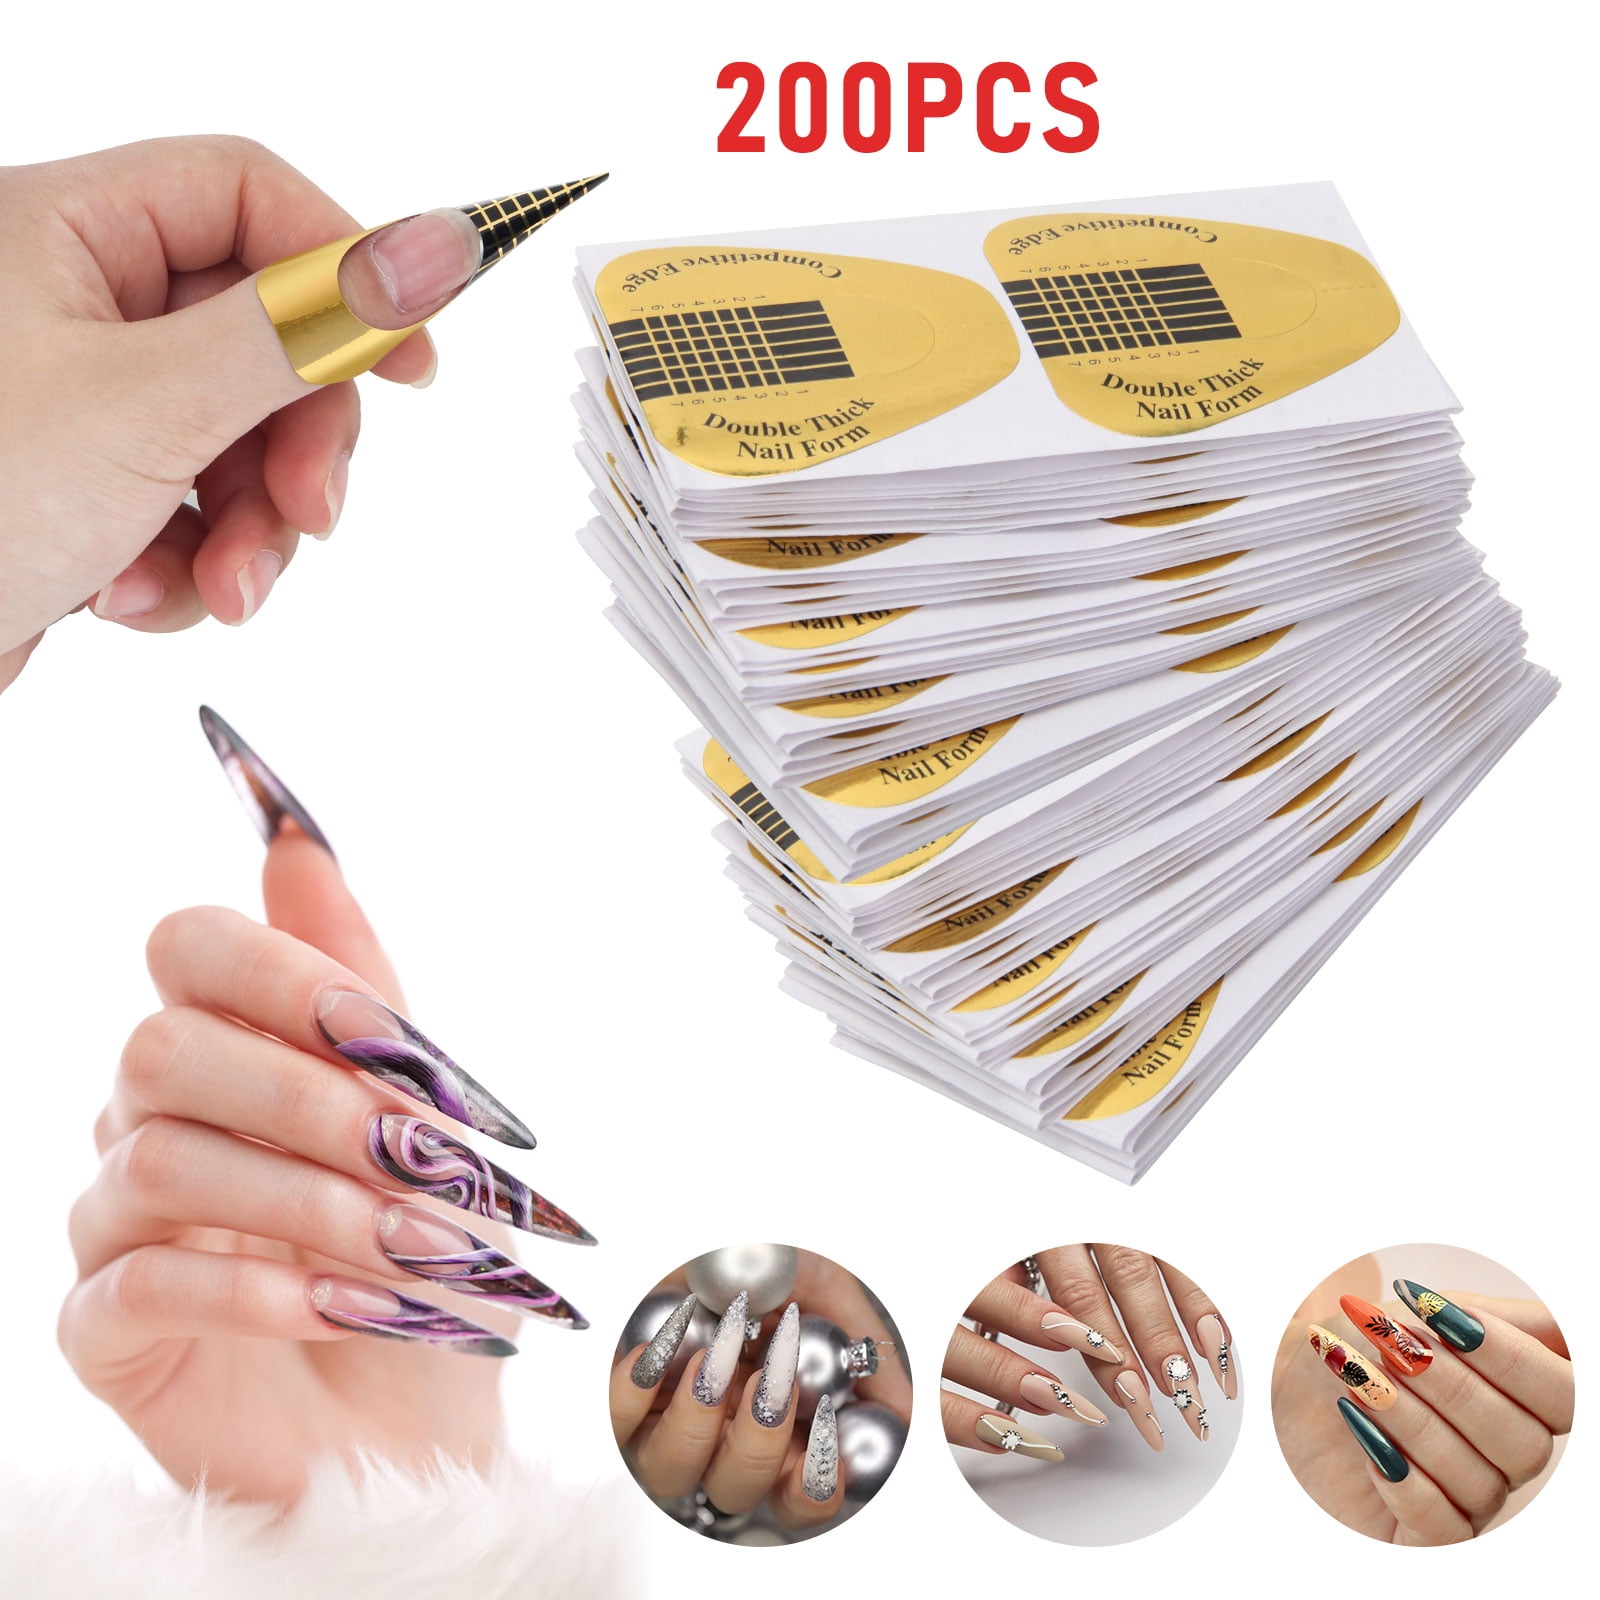 200 Pcs Long Nail Forms for Acrylic Nails, Thick Nail Art Tips Extension  Forms, Durable Acrylic Nail Paper Forms for Gel Nail, Nail Former Stickers  with Numbers Marked : Amazon.in: Beauty